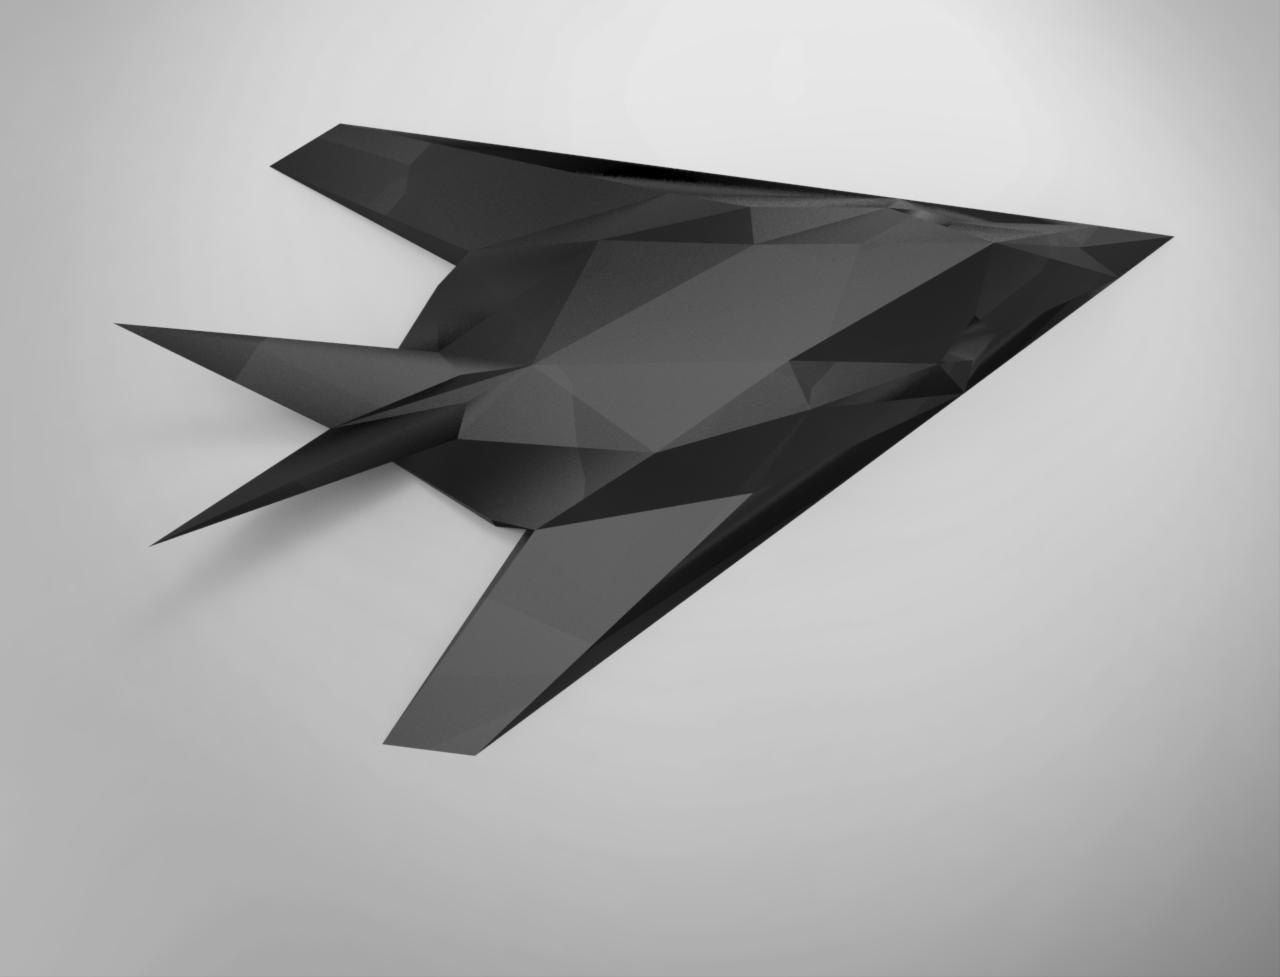 Printable Paper Model of F117 Nighthawk Fighter Jet by MushMool on Etsy